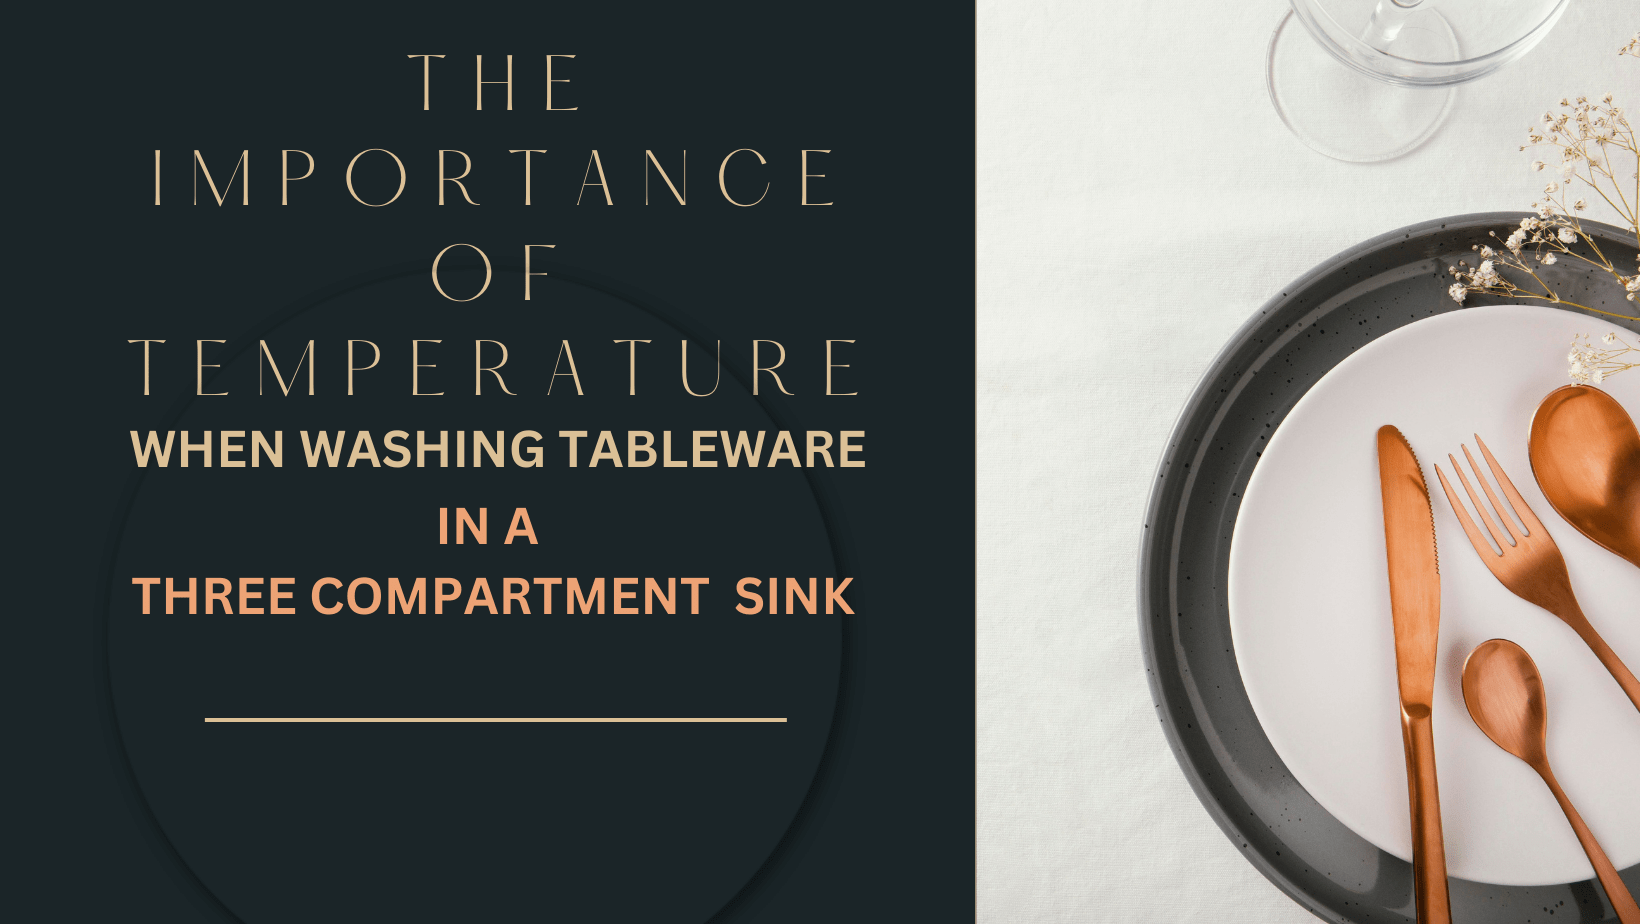 When Washing Tableware In a Three Compartment Sink